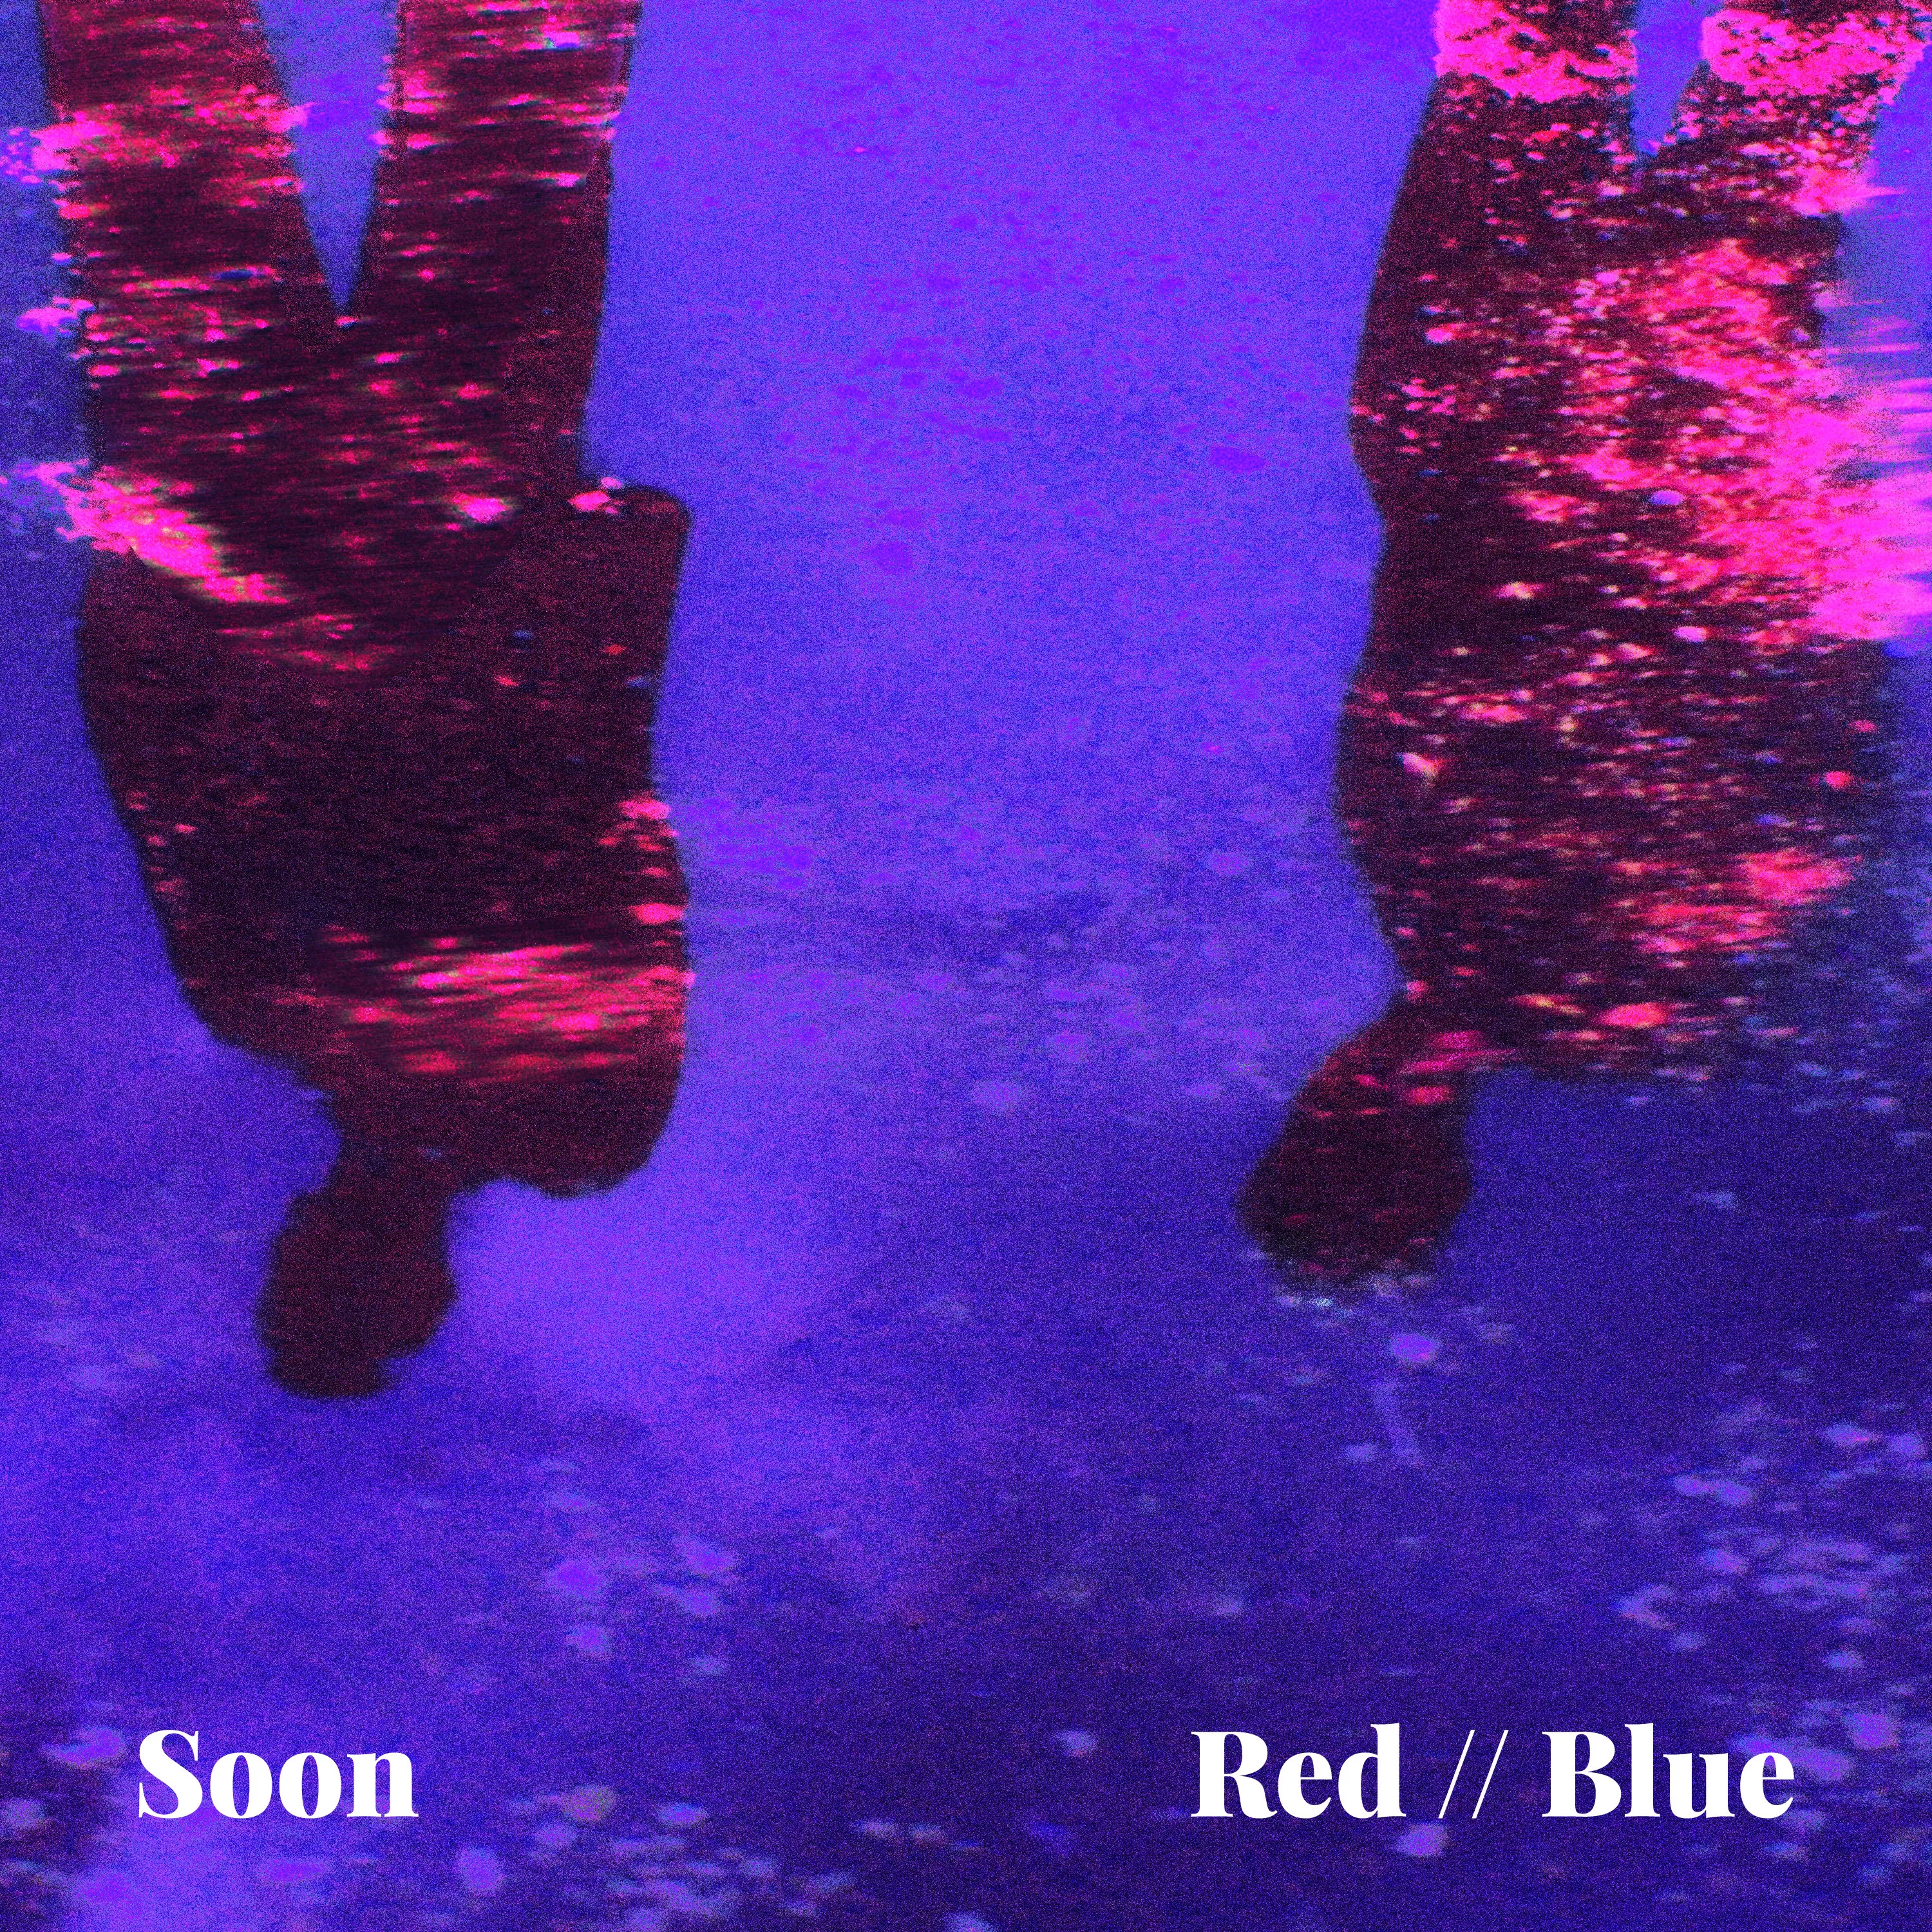 Red // Blue - Soon